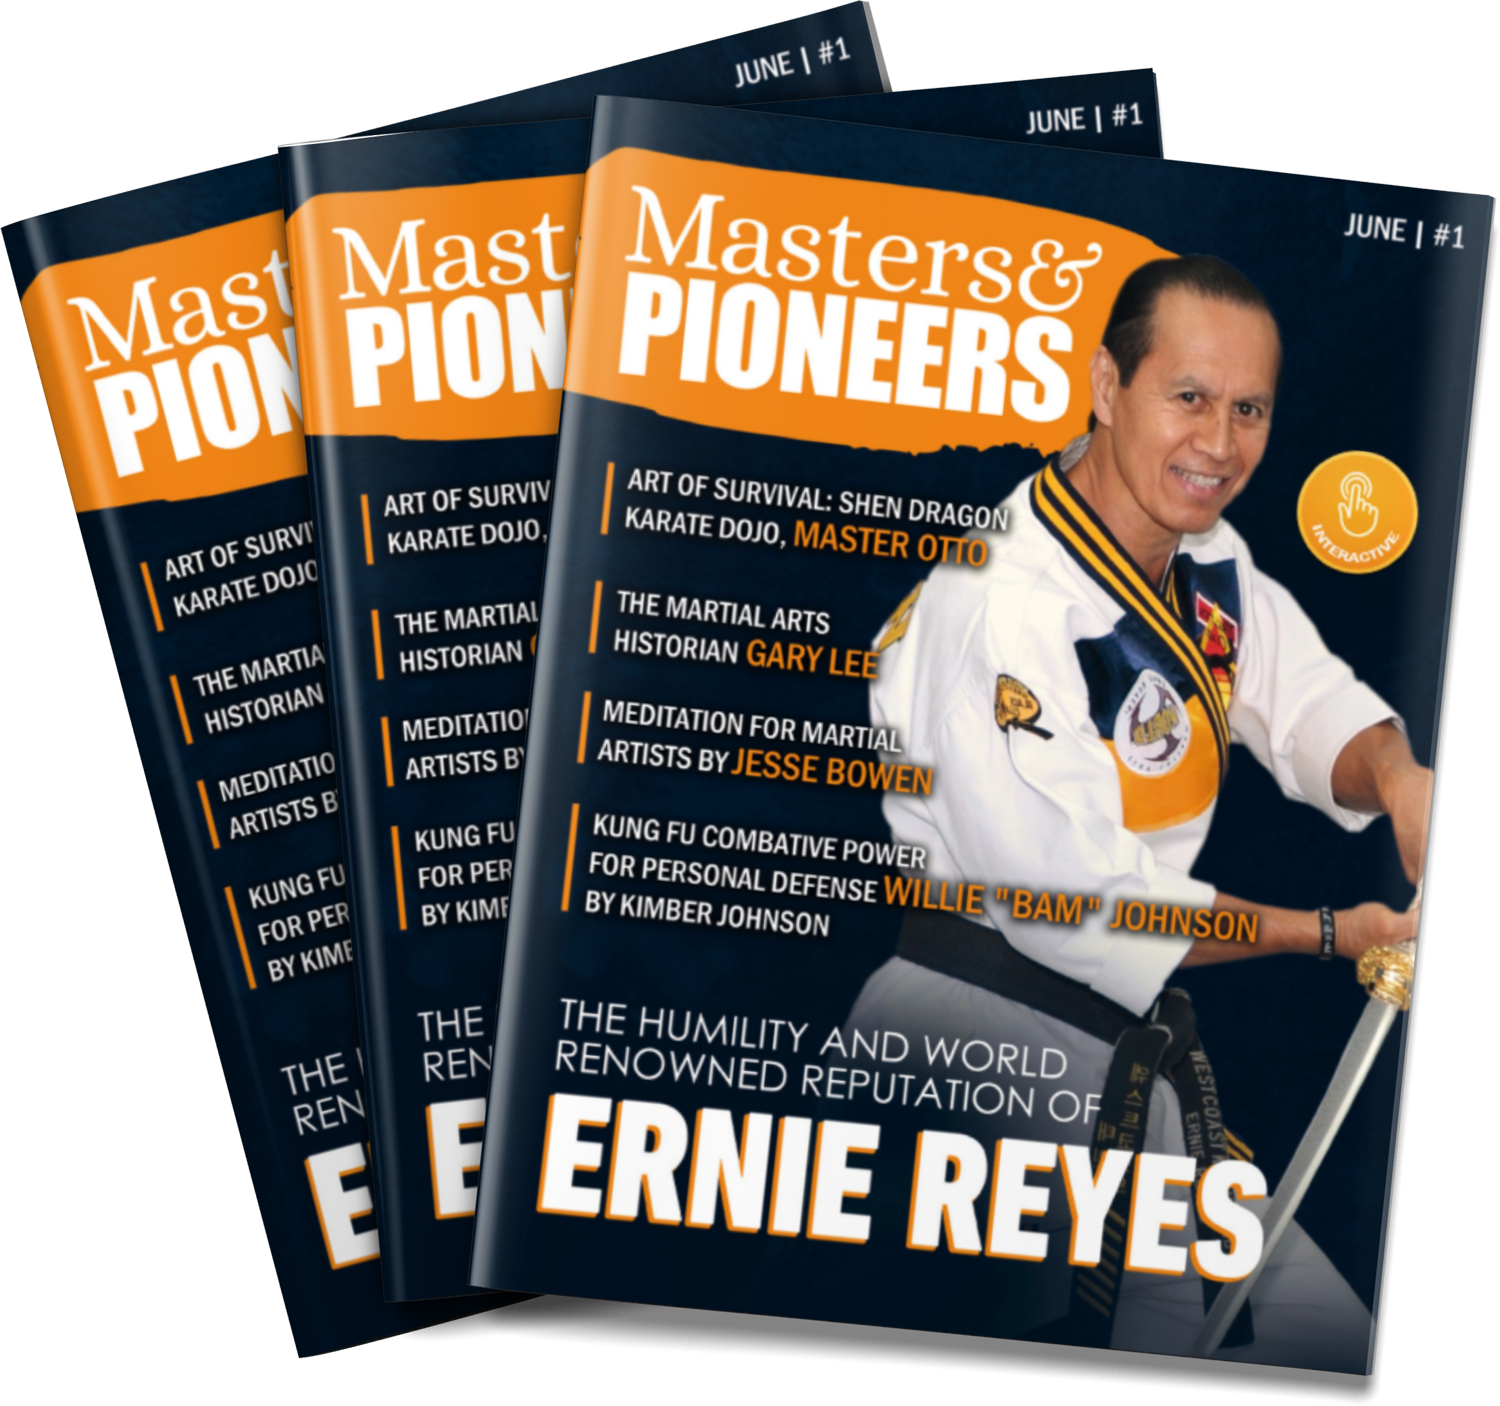 Masters & Pioneers Magazine Subscription Printed Copy  - (12 Months Pre-Paid $36 SAVINGS)